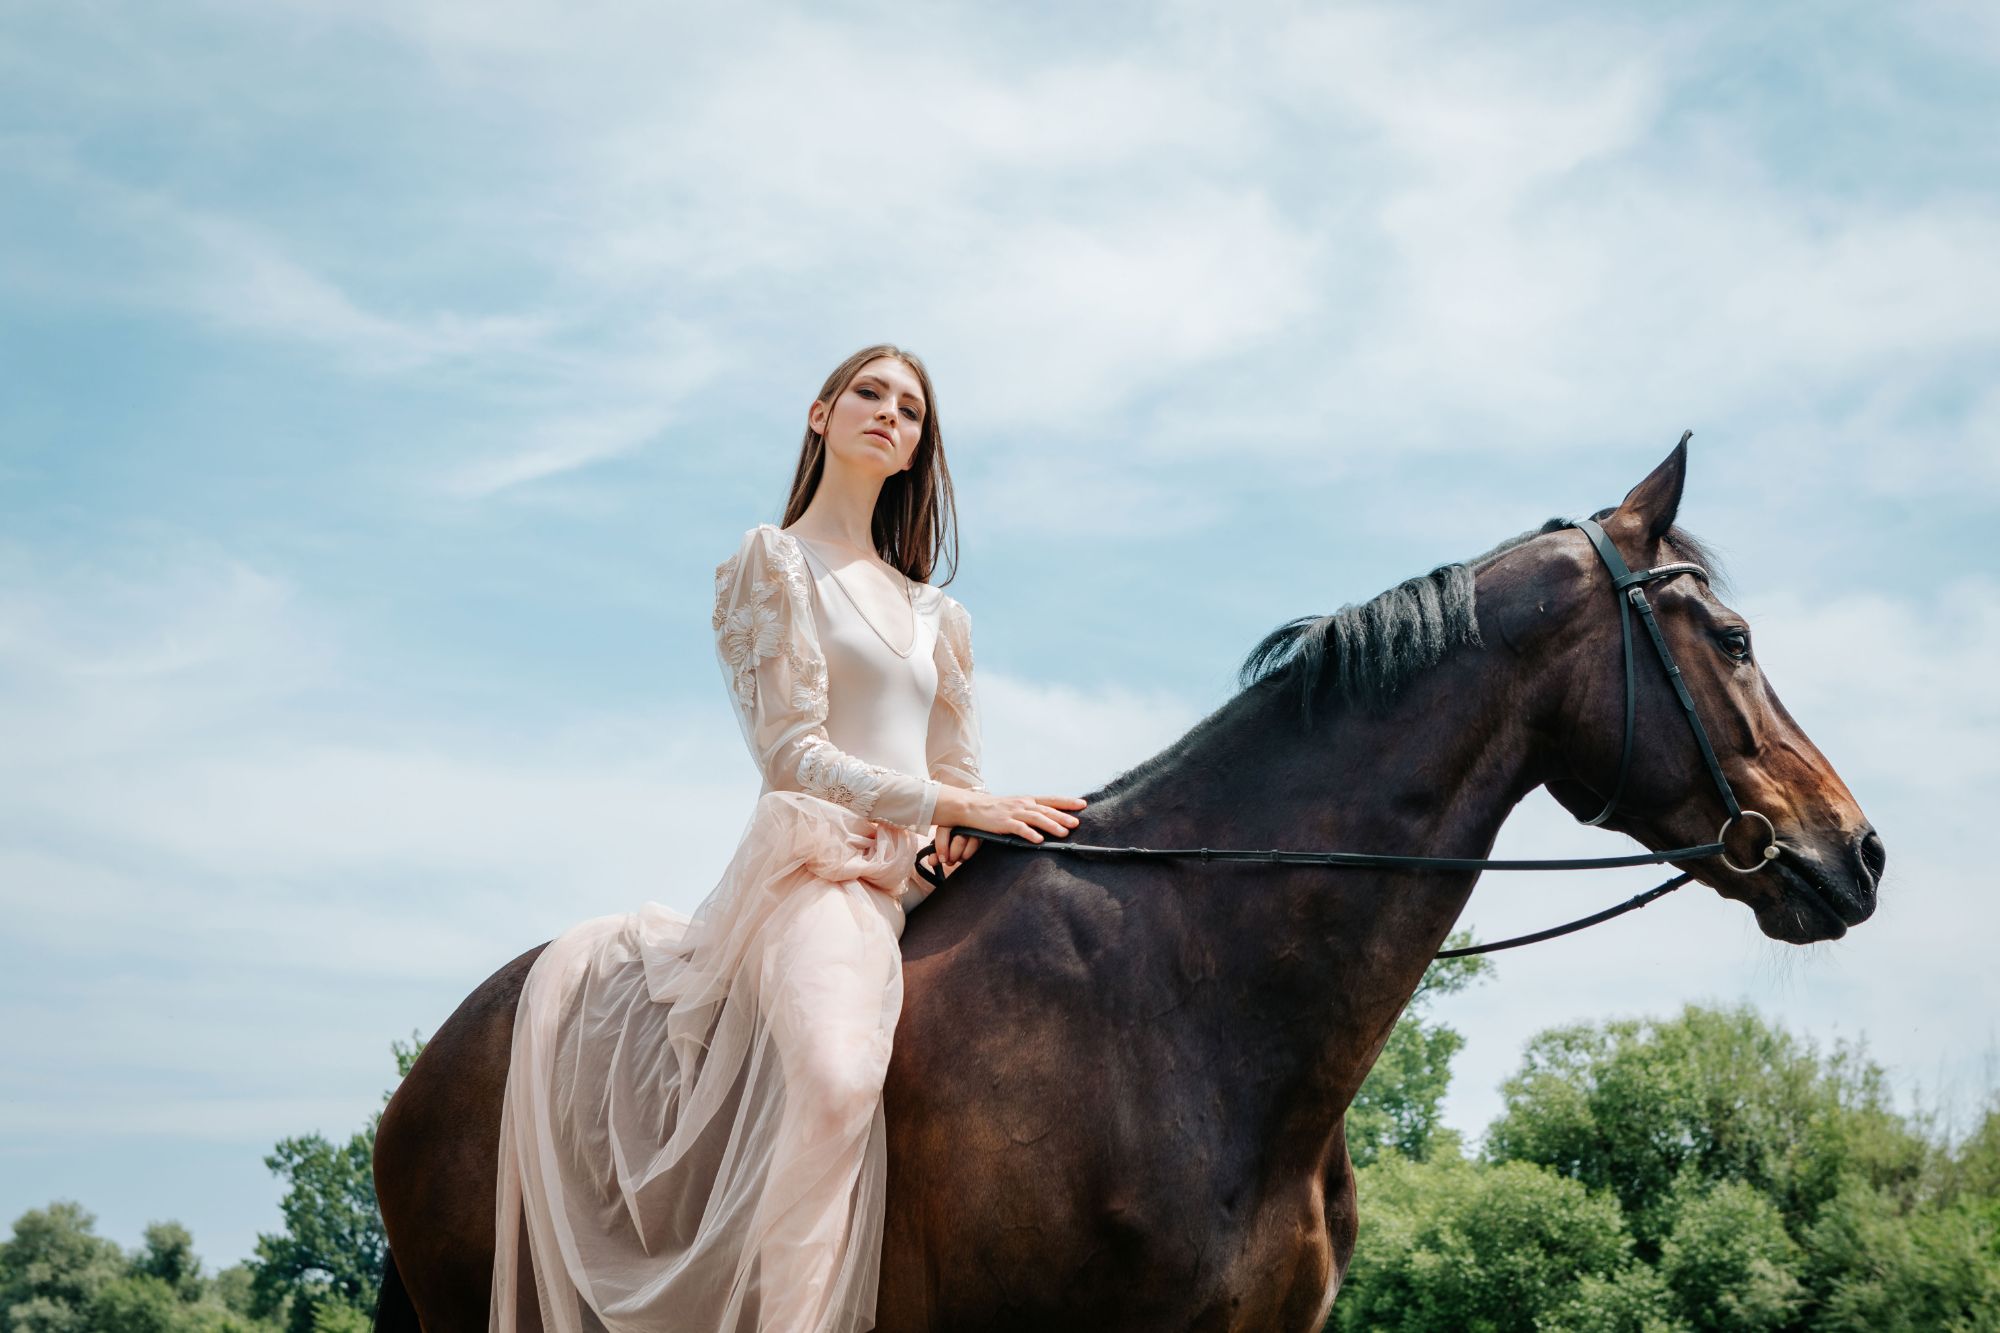 Girl with tulle dress sitting on a black horse with blue sky background